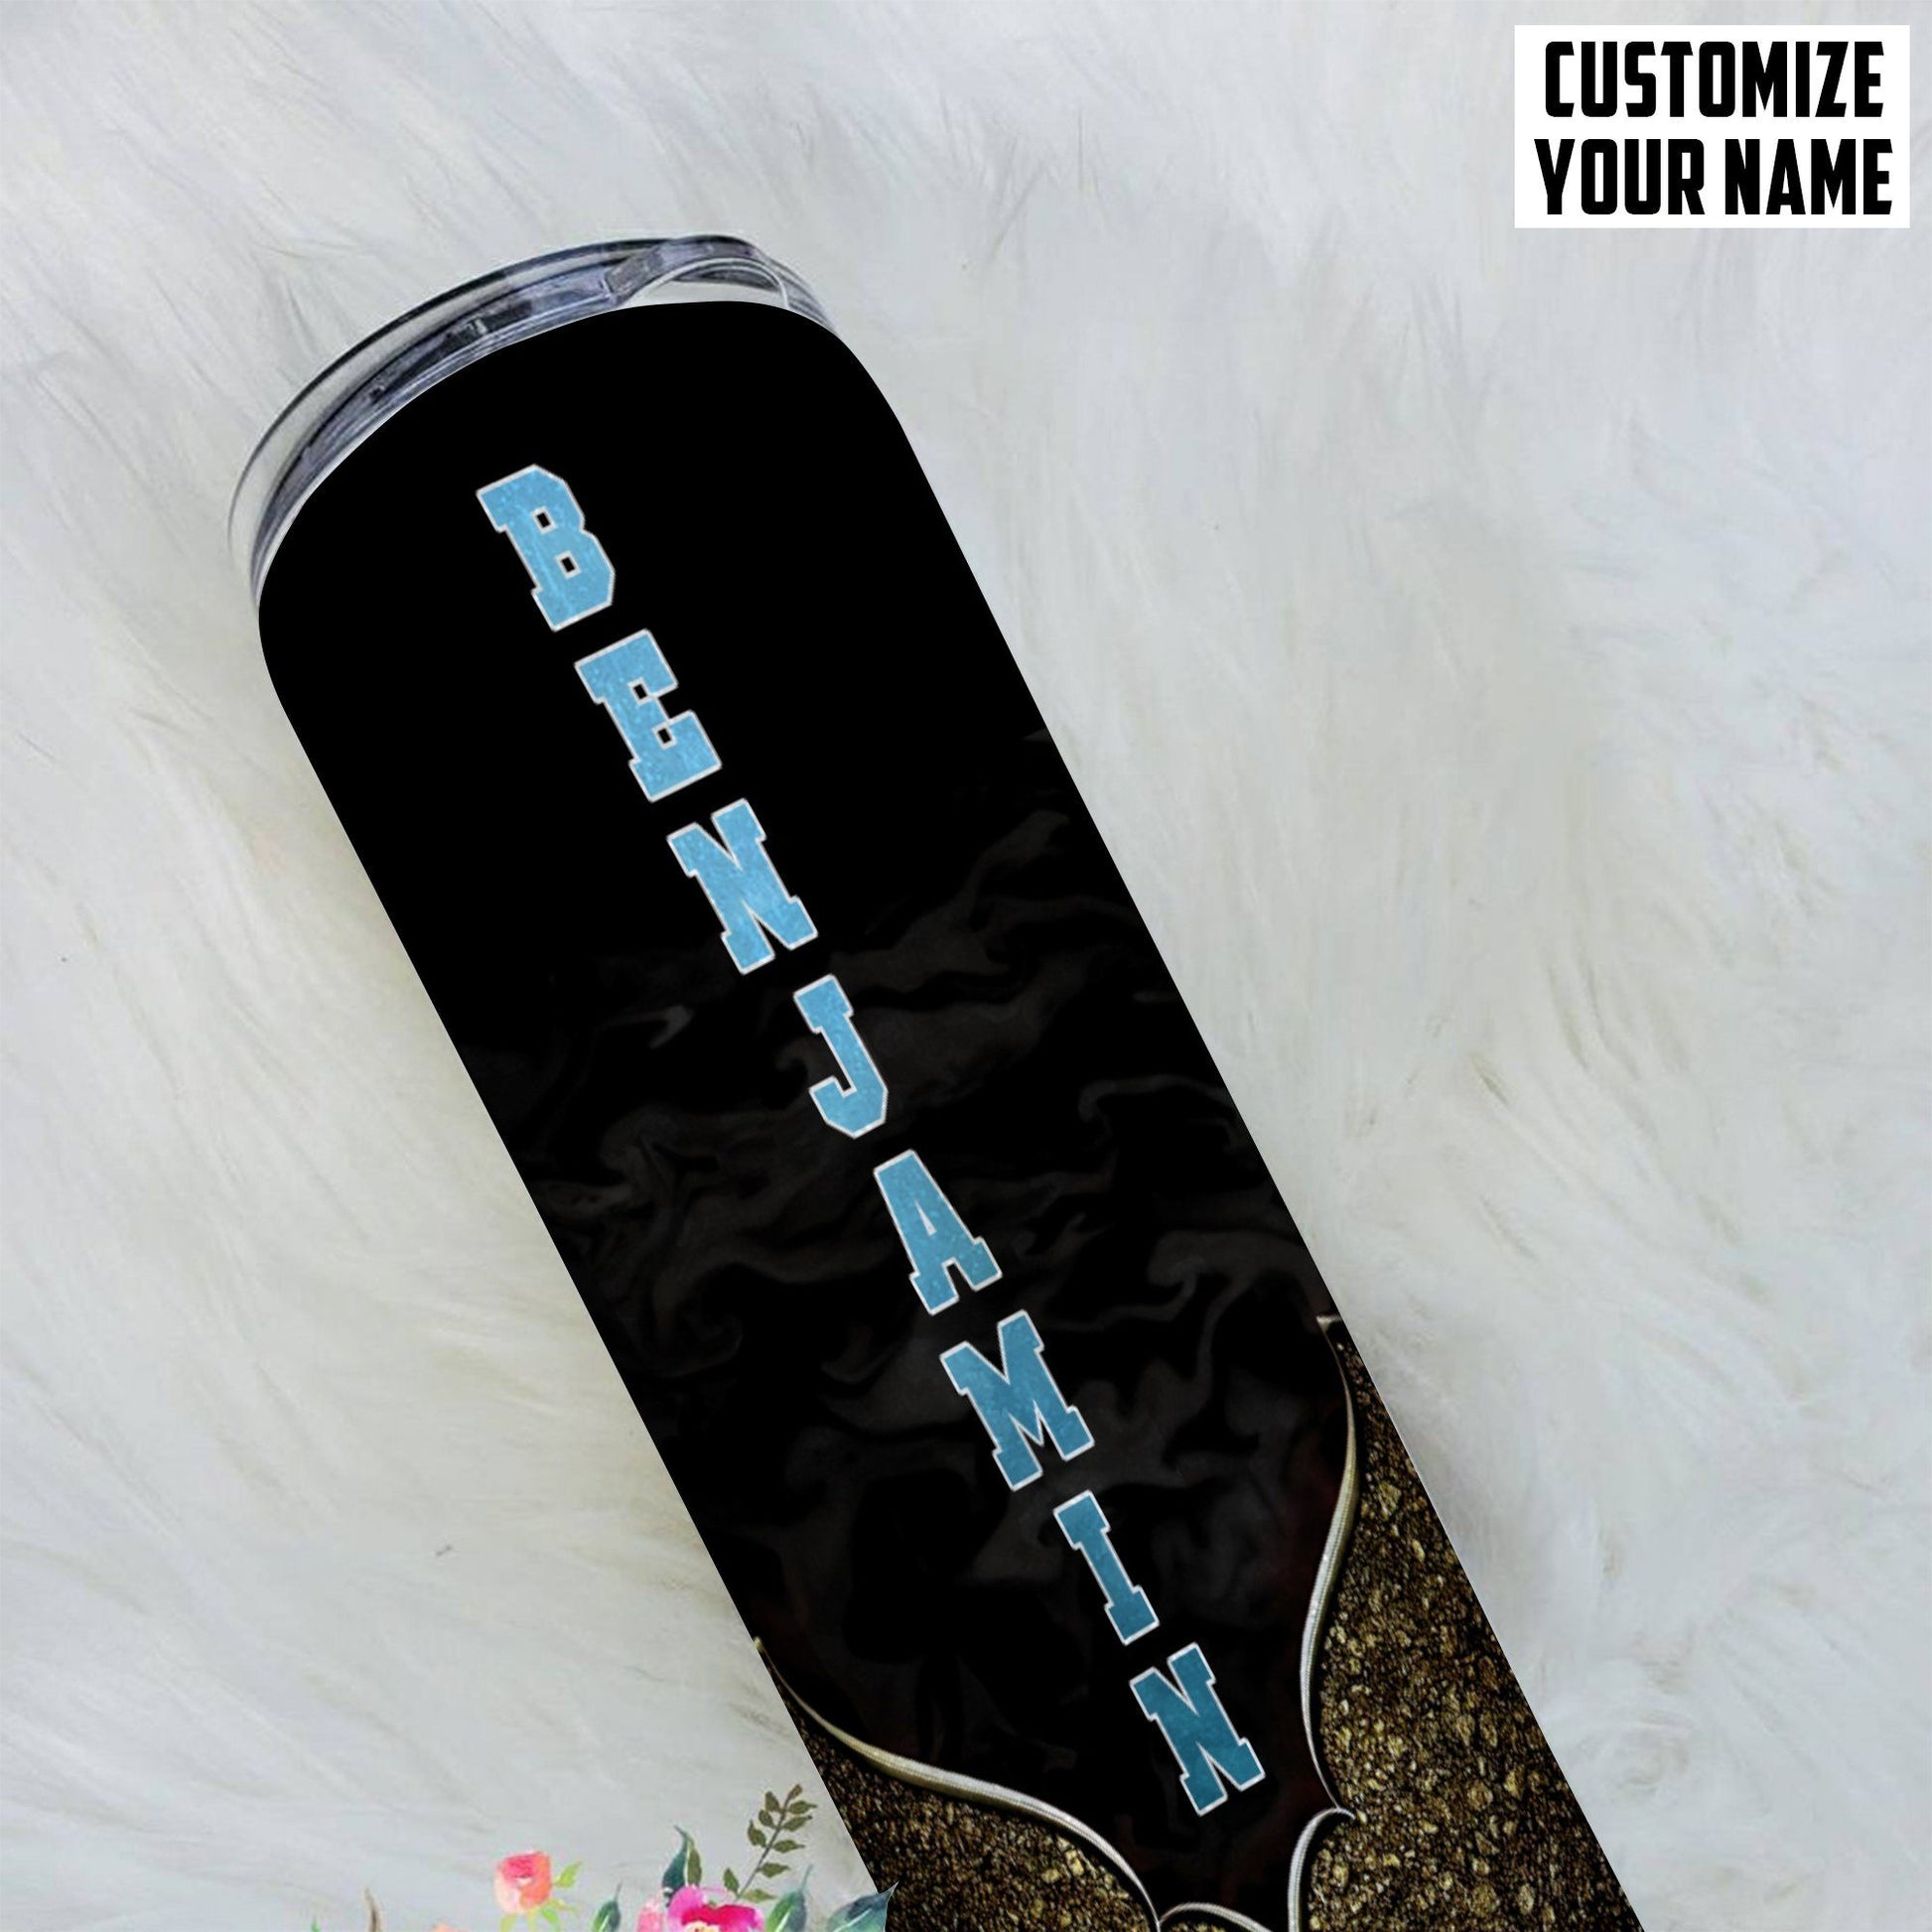 Gearhumans [Best Gift For Father's Day] Gearhuman 3D Being A Papa Is Priceless Lion Fathers Day Gift Custom Name Design Insulated Vacuum Tumbler GW220312 Tumbler